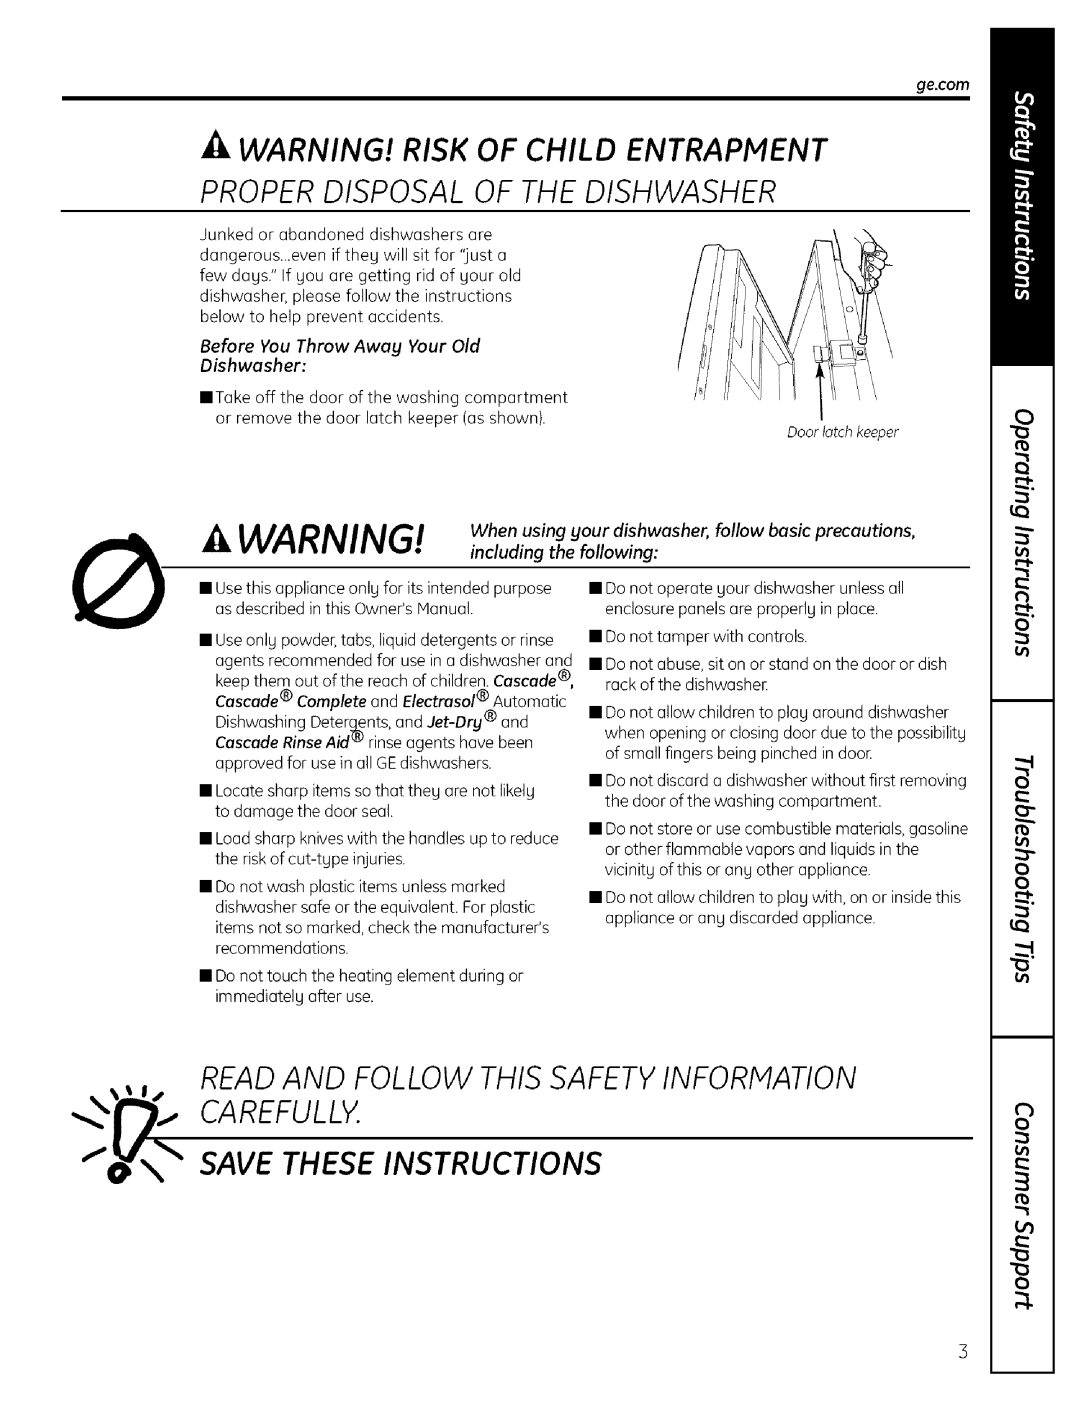 GE EDWSO00 manual Before You Throw Away Your Old Dishwasher, When using your dishwasher, follow basic precautions 